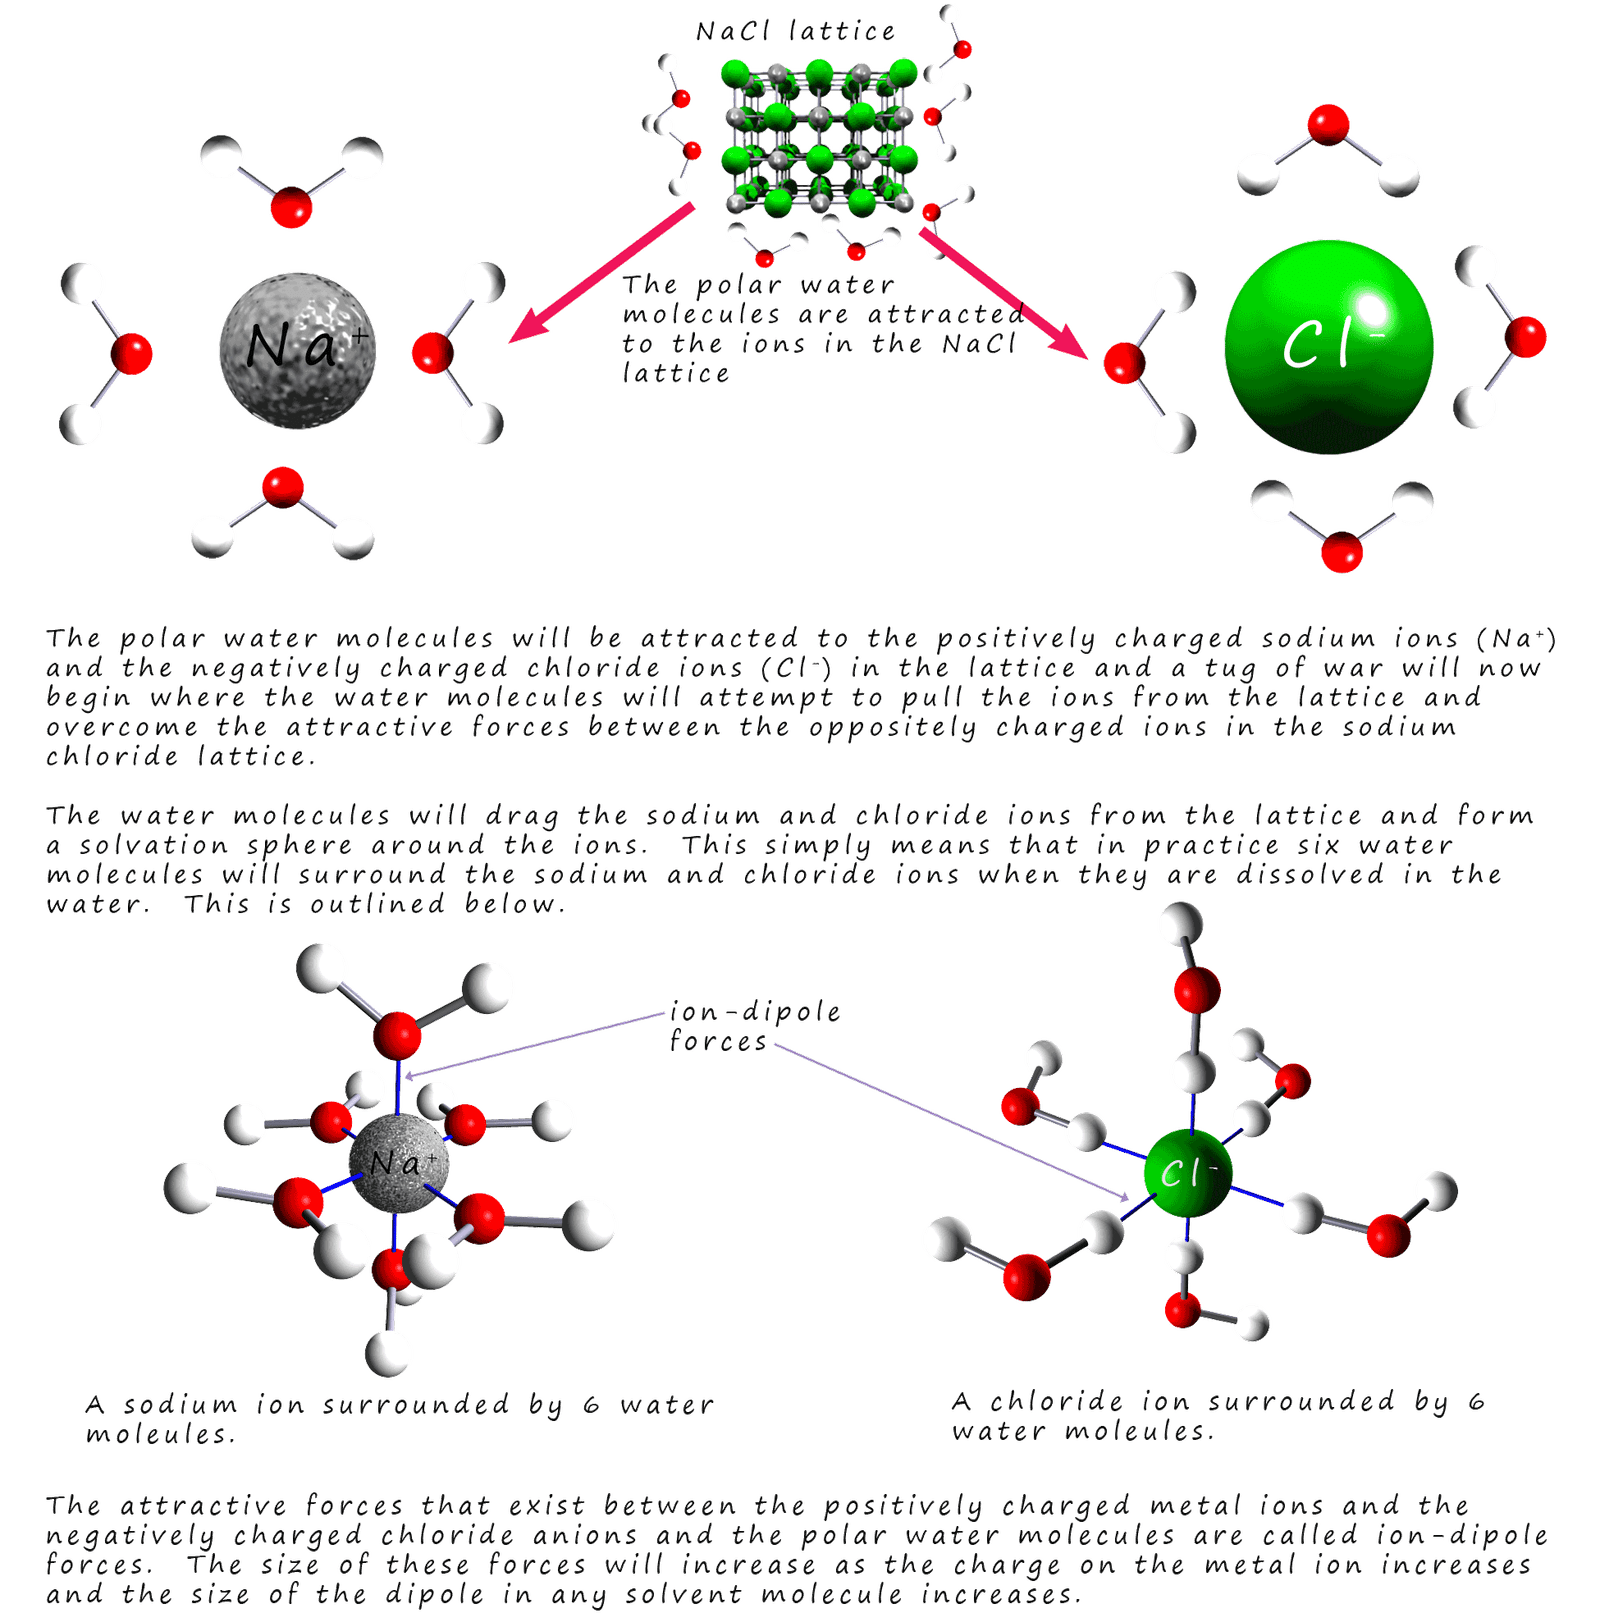 explanation of how ions in sodium chloride dissolve in water by forming solvation spheres.